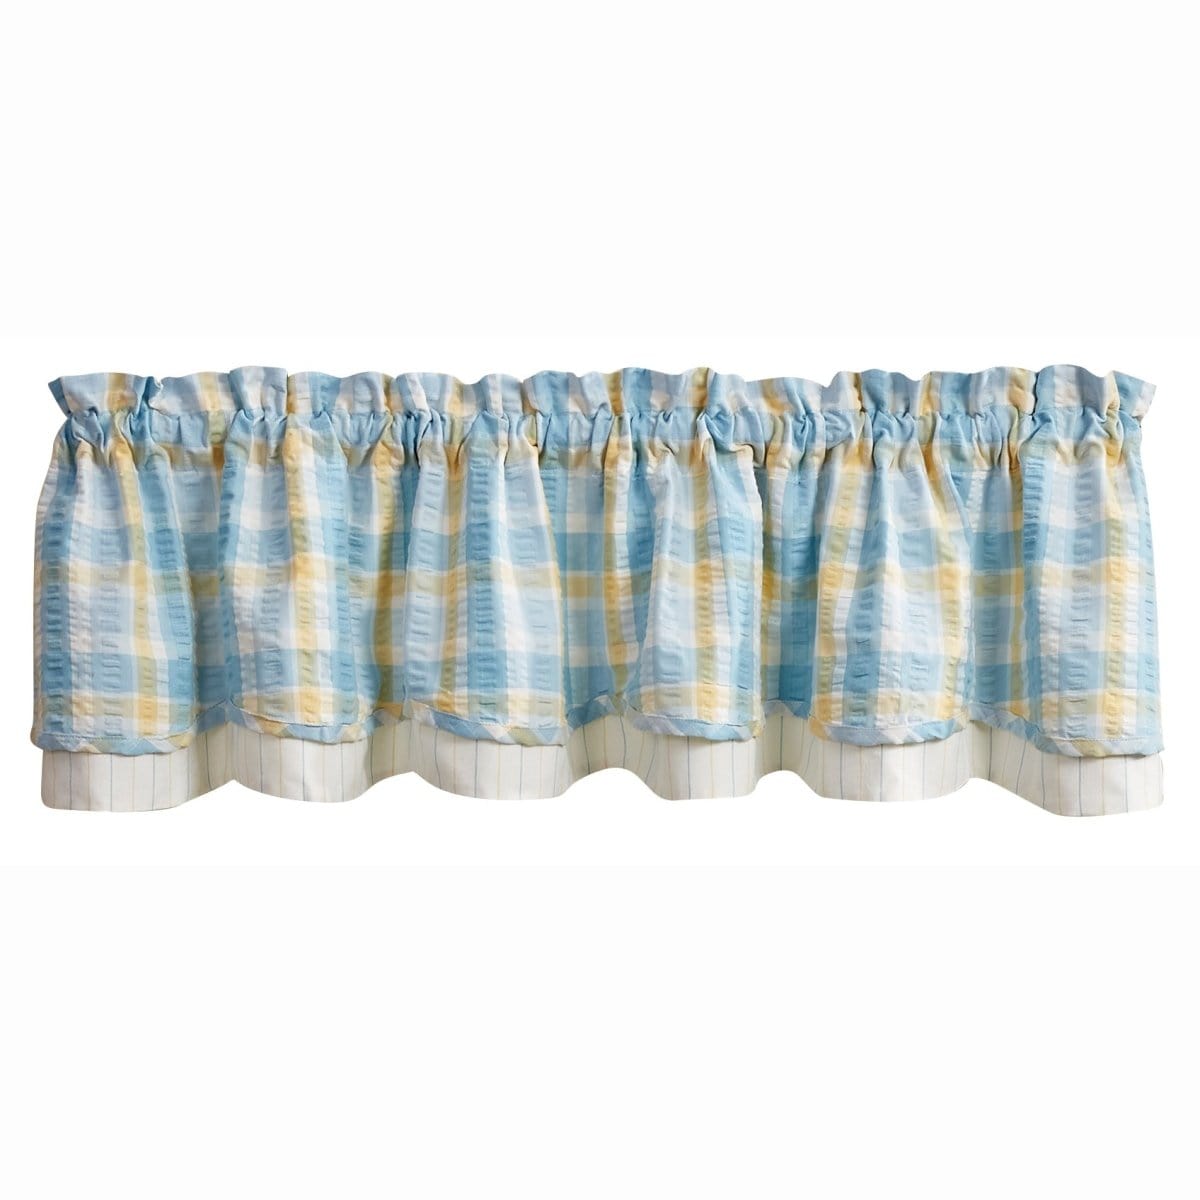 Forget Me Not Layered Valance Lined-Park Designs-The Village Merchant